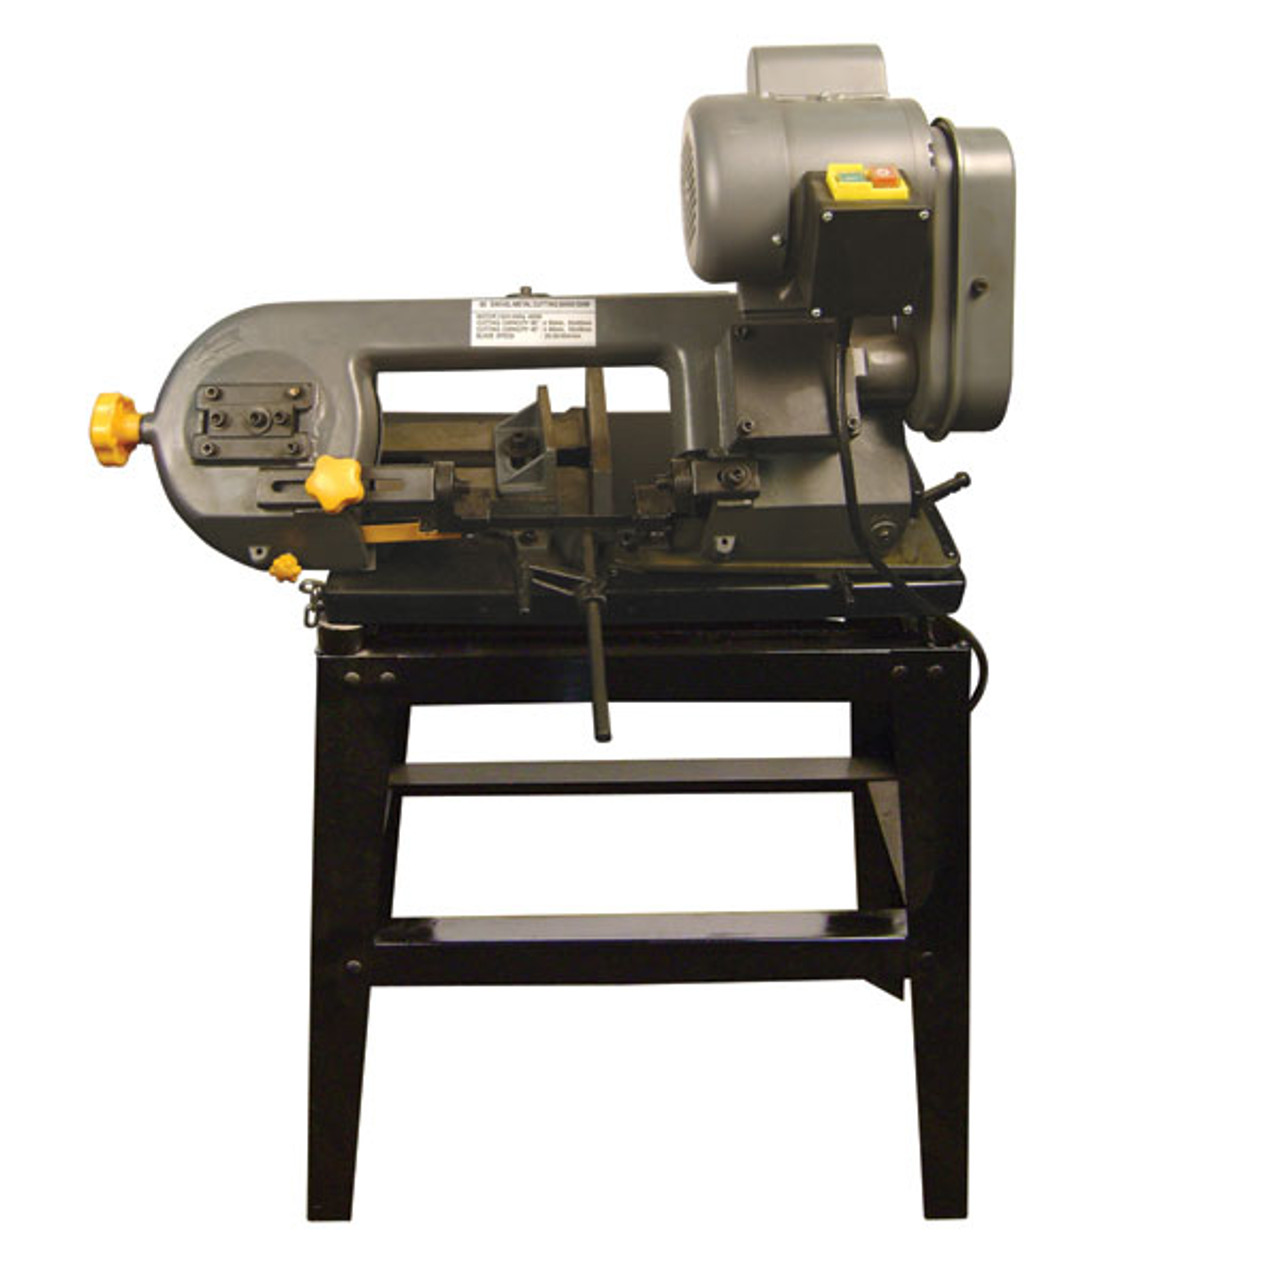 87-115-631      3.5" BANDSAW WITH STAND#T409 - TTC